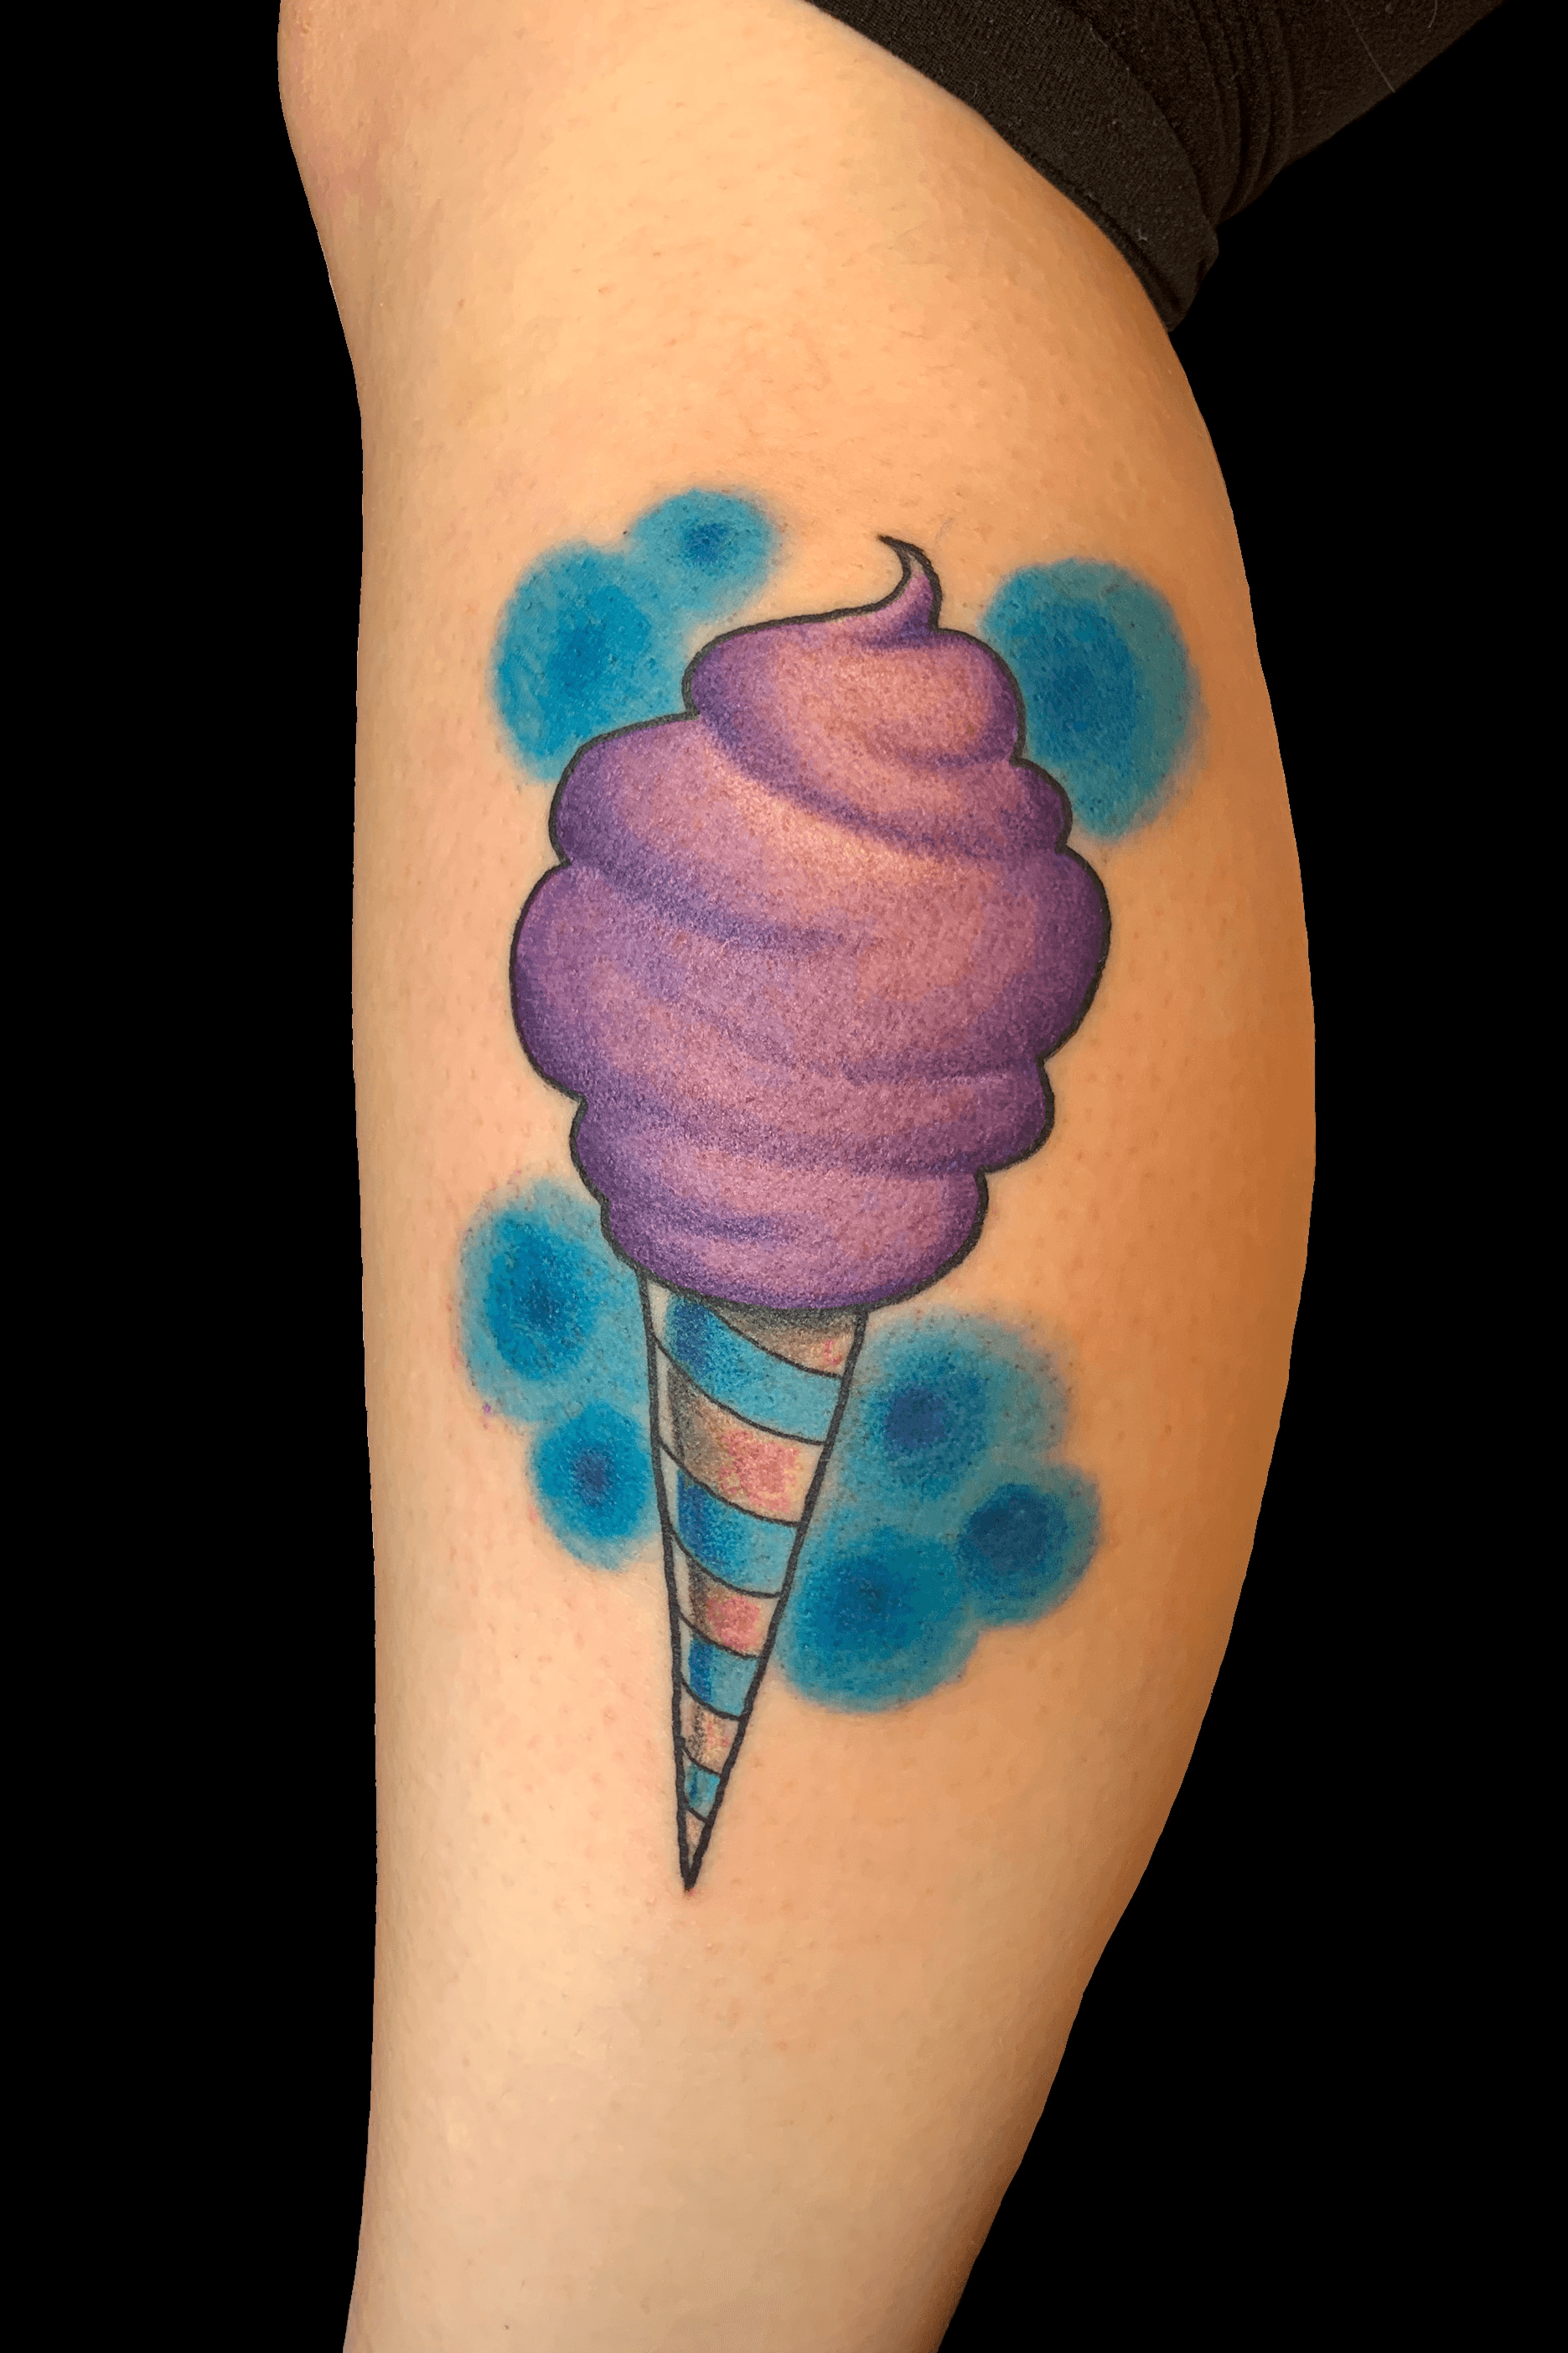 Inked Classic Tattoos Cotton Candy  Popcorn Made in USA Temporary Tattoo   eBay